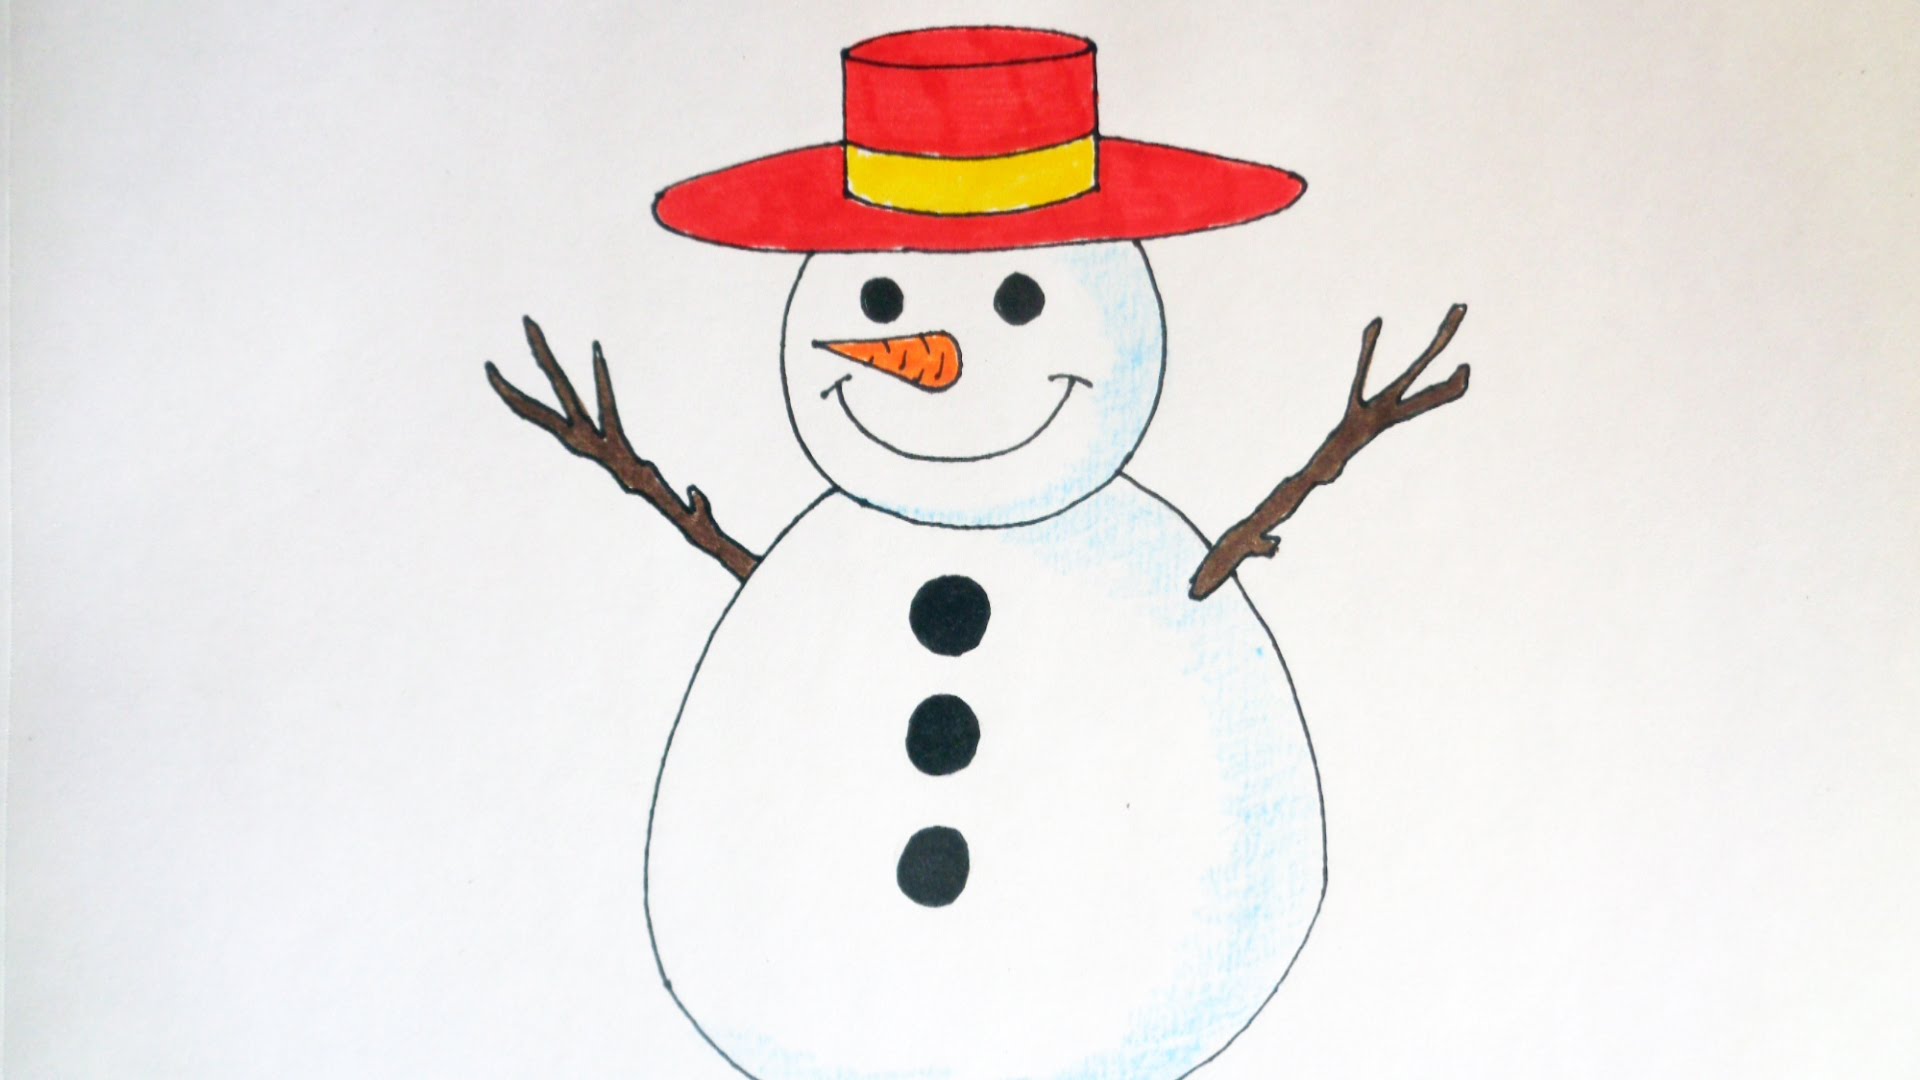 How to draw a Snowman, Christmas stuff, pictures - YouTube